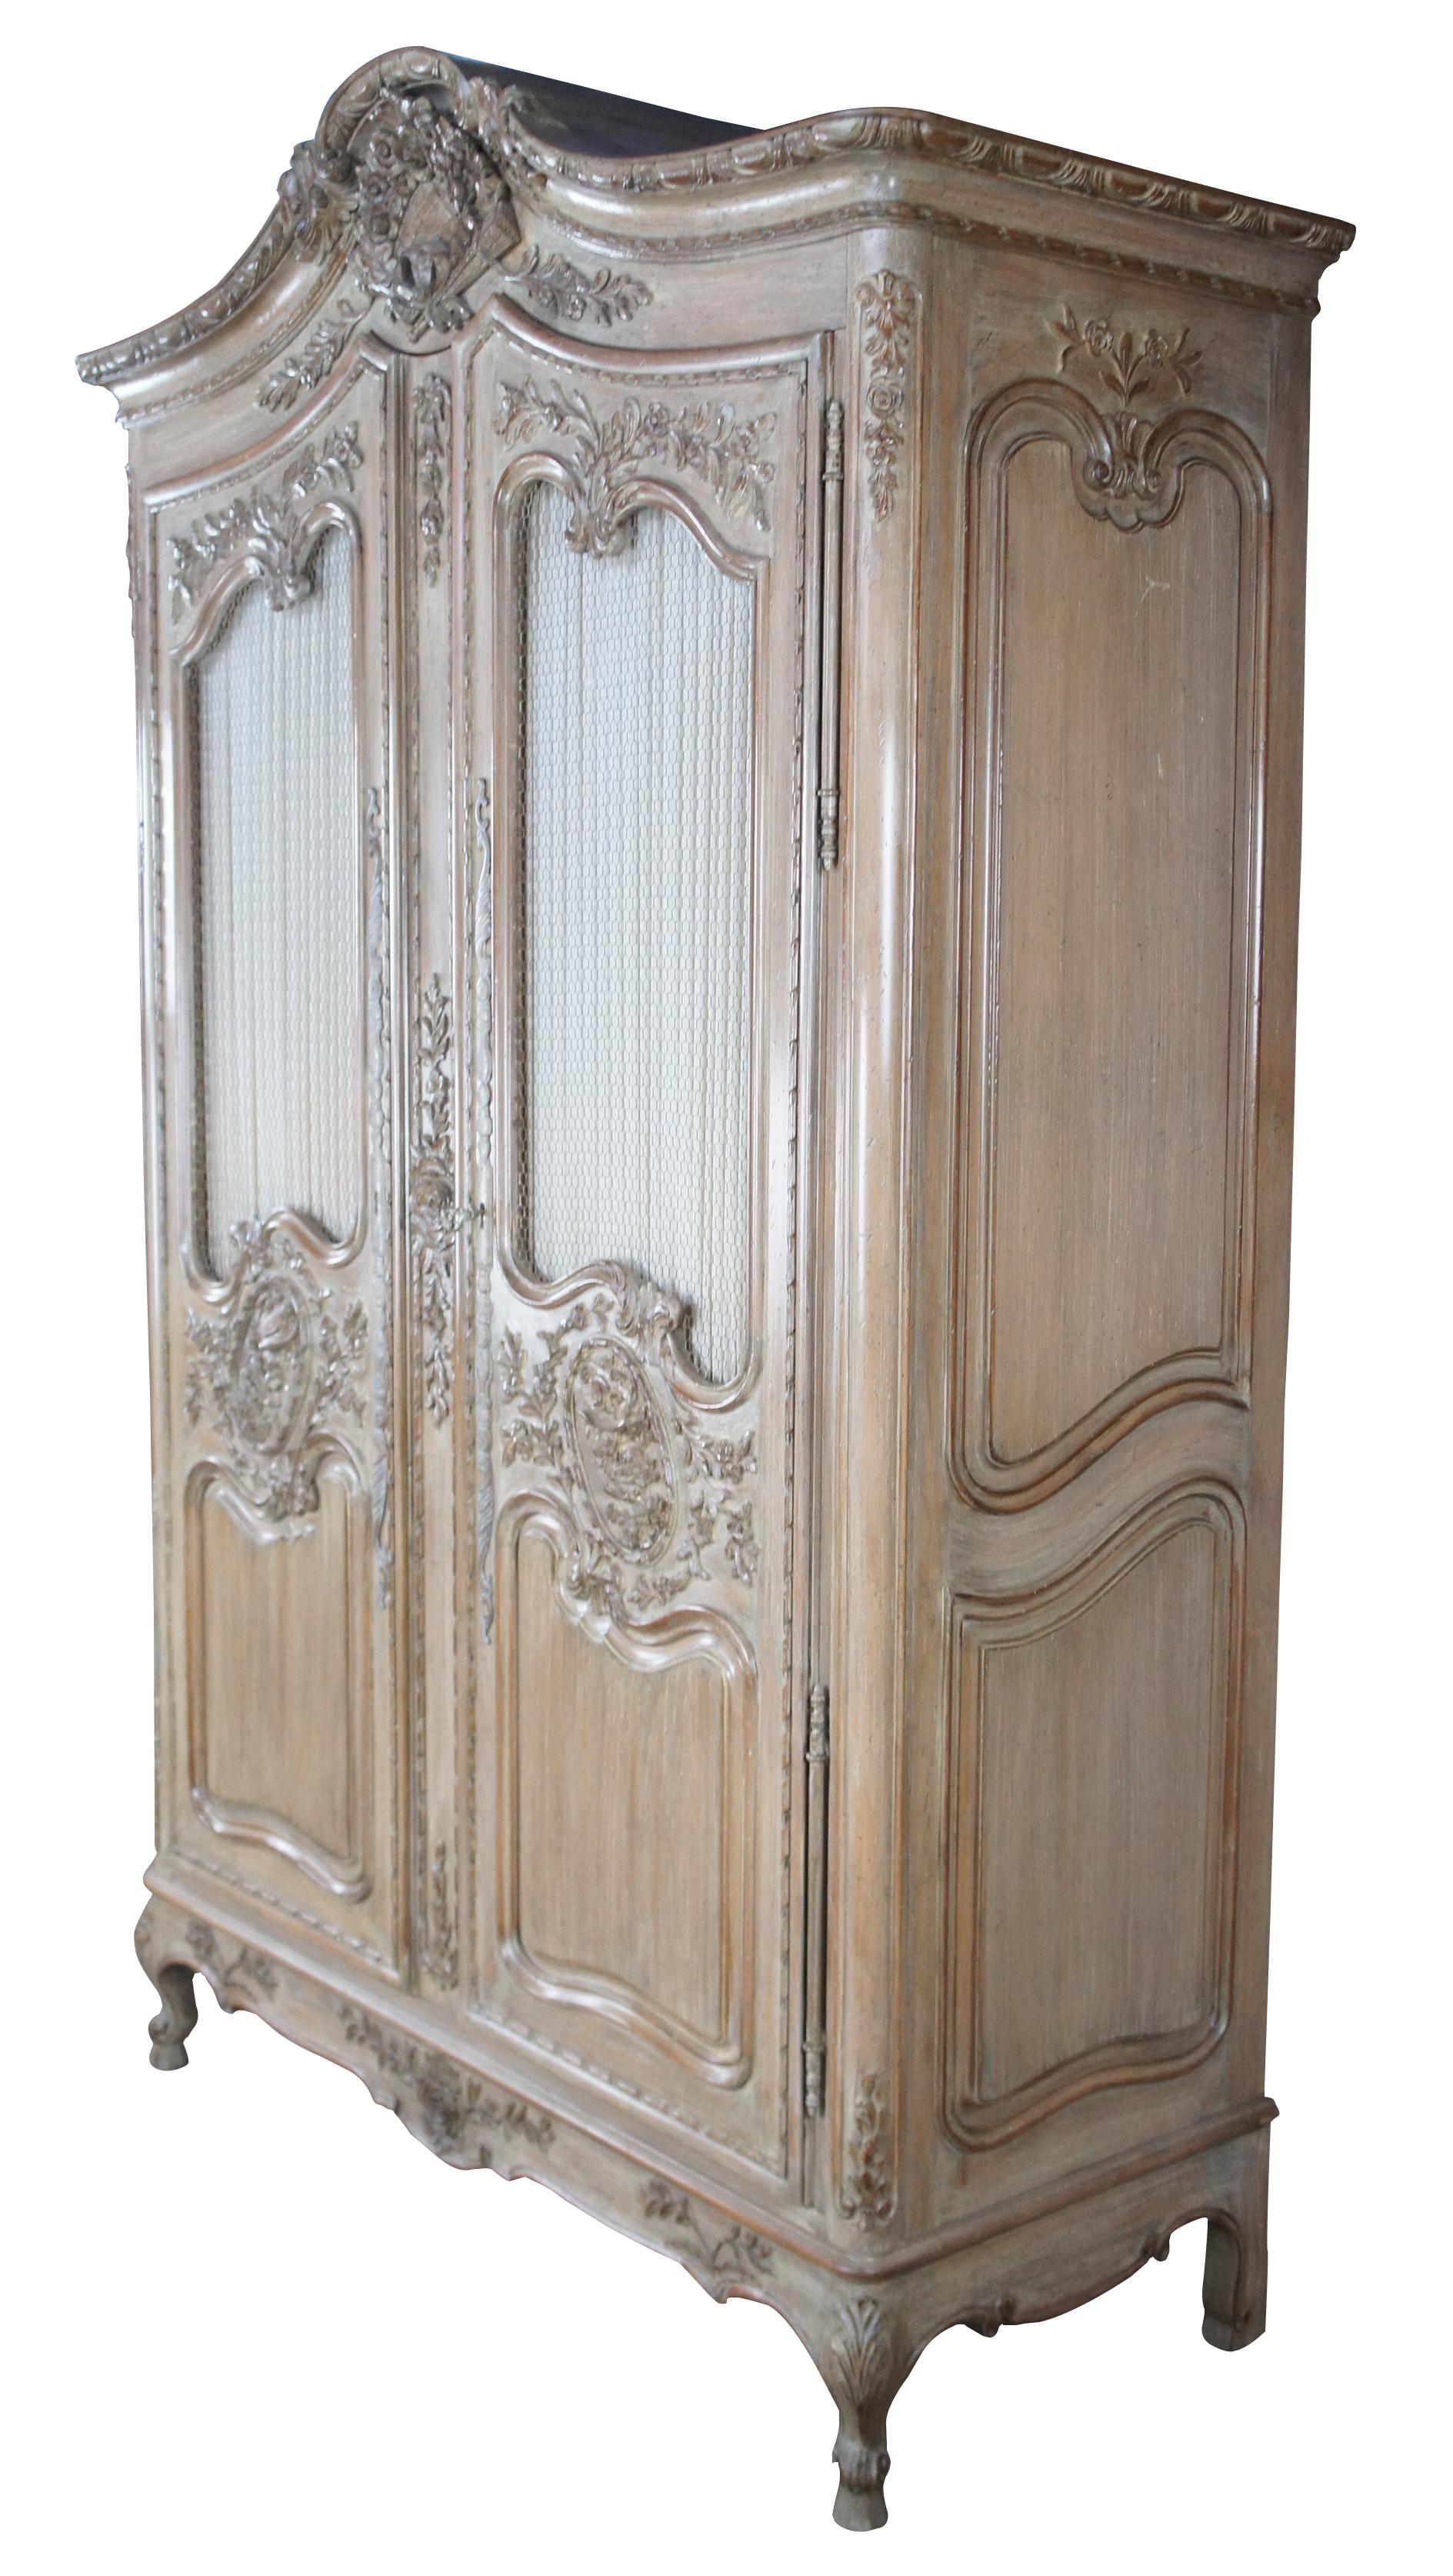 Vintage Auffray & Co fine French furniture armoire. Featuring a blend of Country French and Provincial styling with Neoclassical accents, chicken wire drape doors and cabriole legs. Opens to TV compartment with area for components and six additional